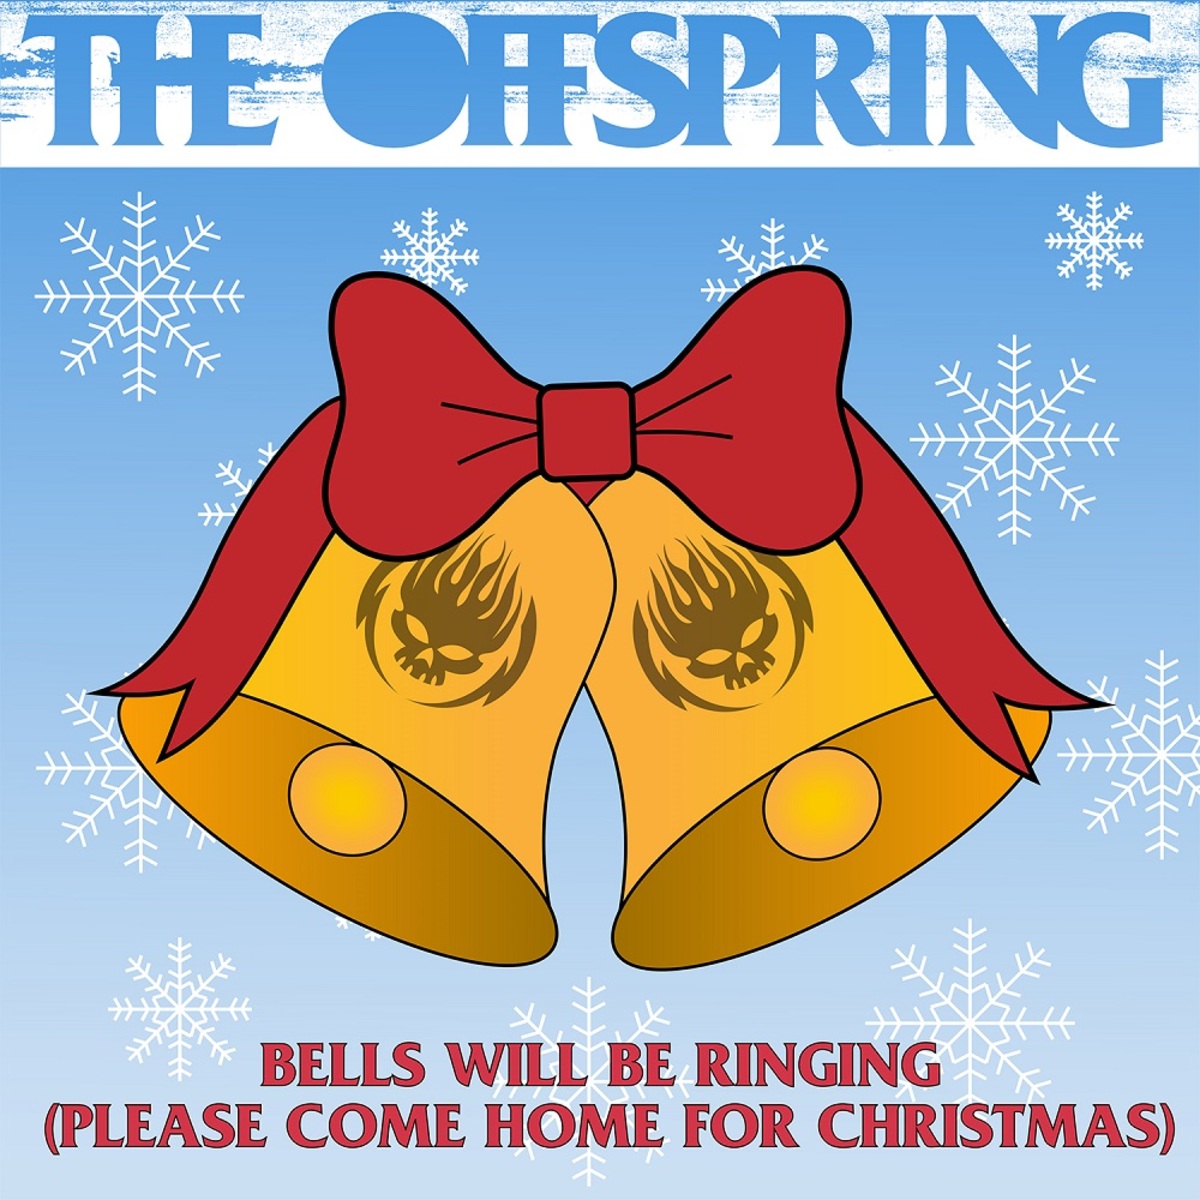 Het is goedkoop Bedrijf Groet THE OFFSPRING、クリスマス・ソングのカバー「Bells Will Be Ringing (Please Come Home For  Christmas)」リリース！ | 激ロック ニュース